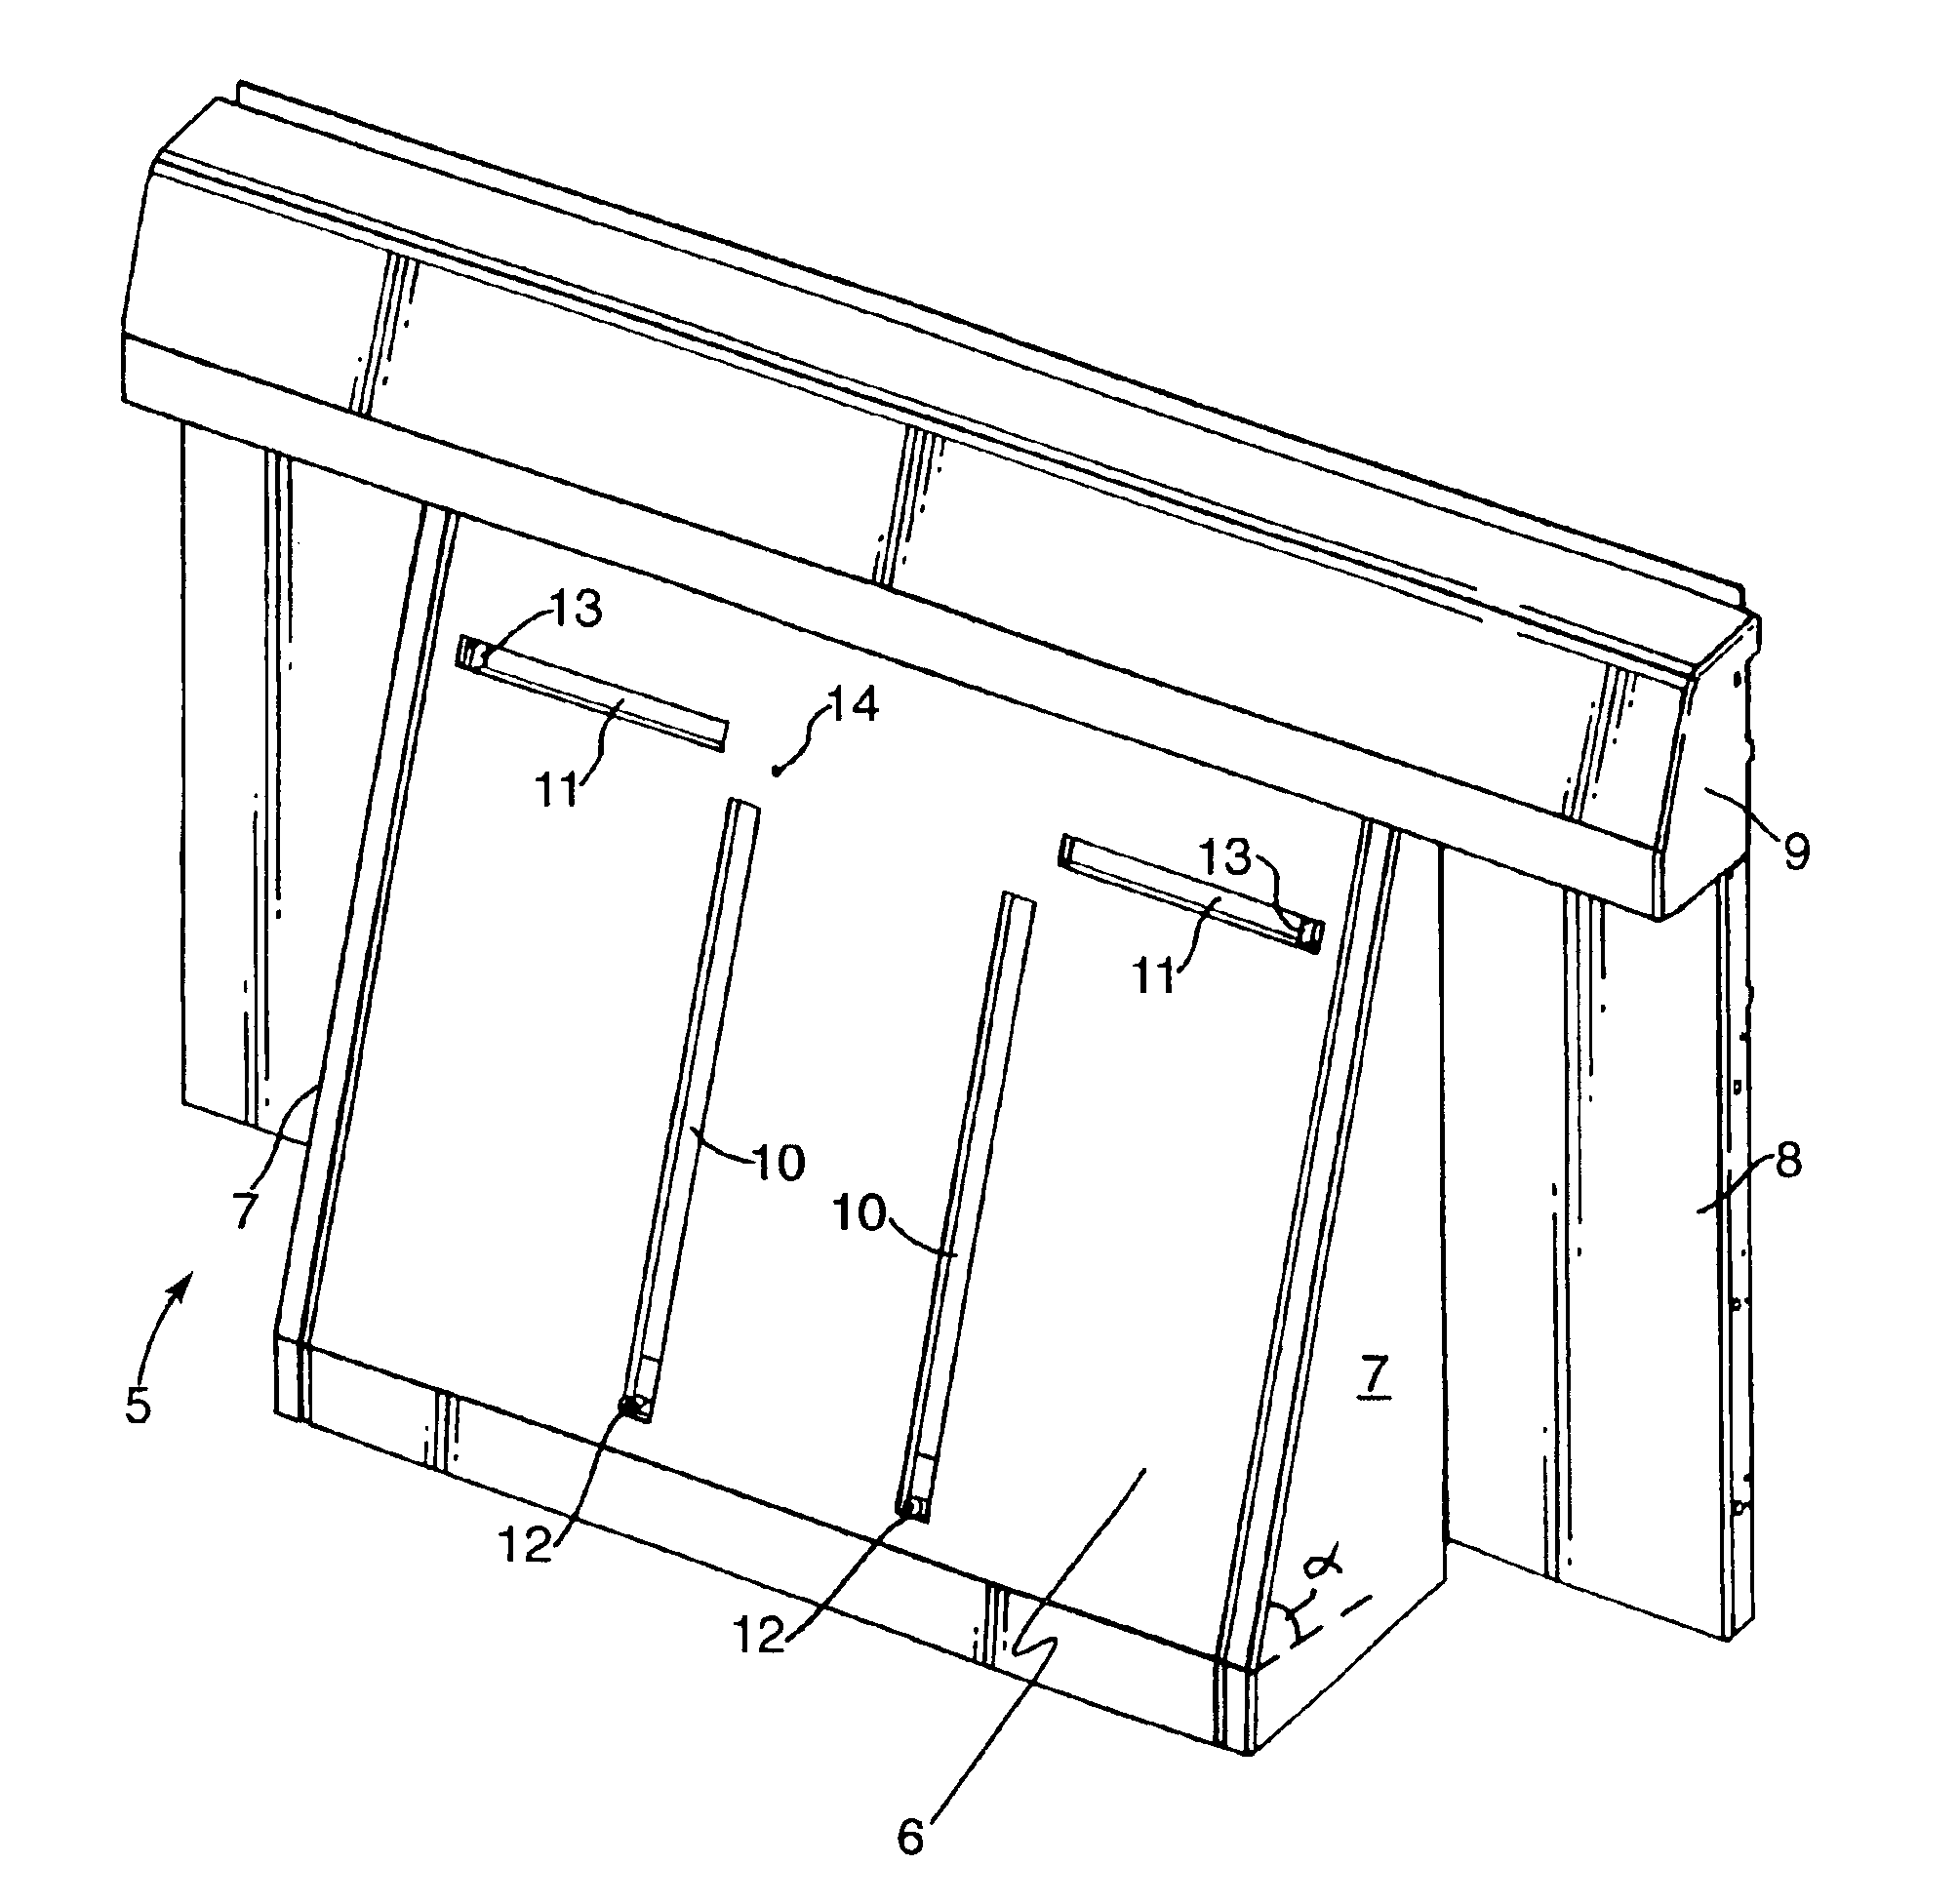 Recording plate or film loading device